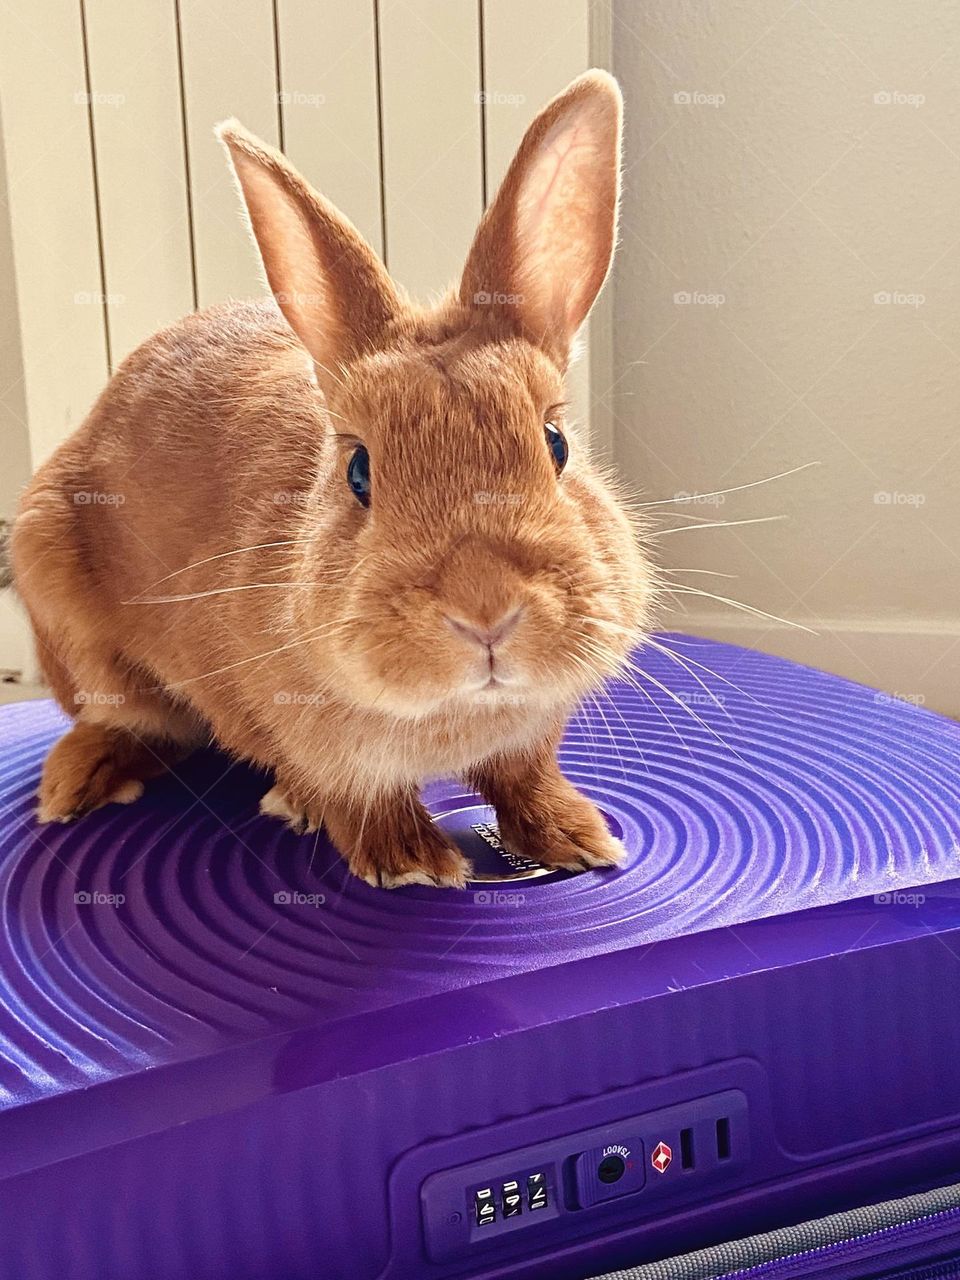 The traveling bunny